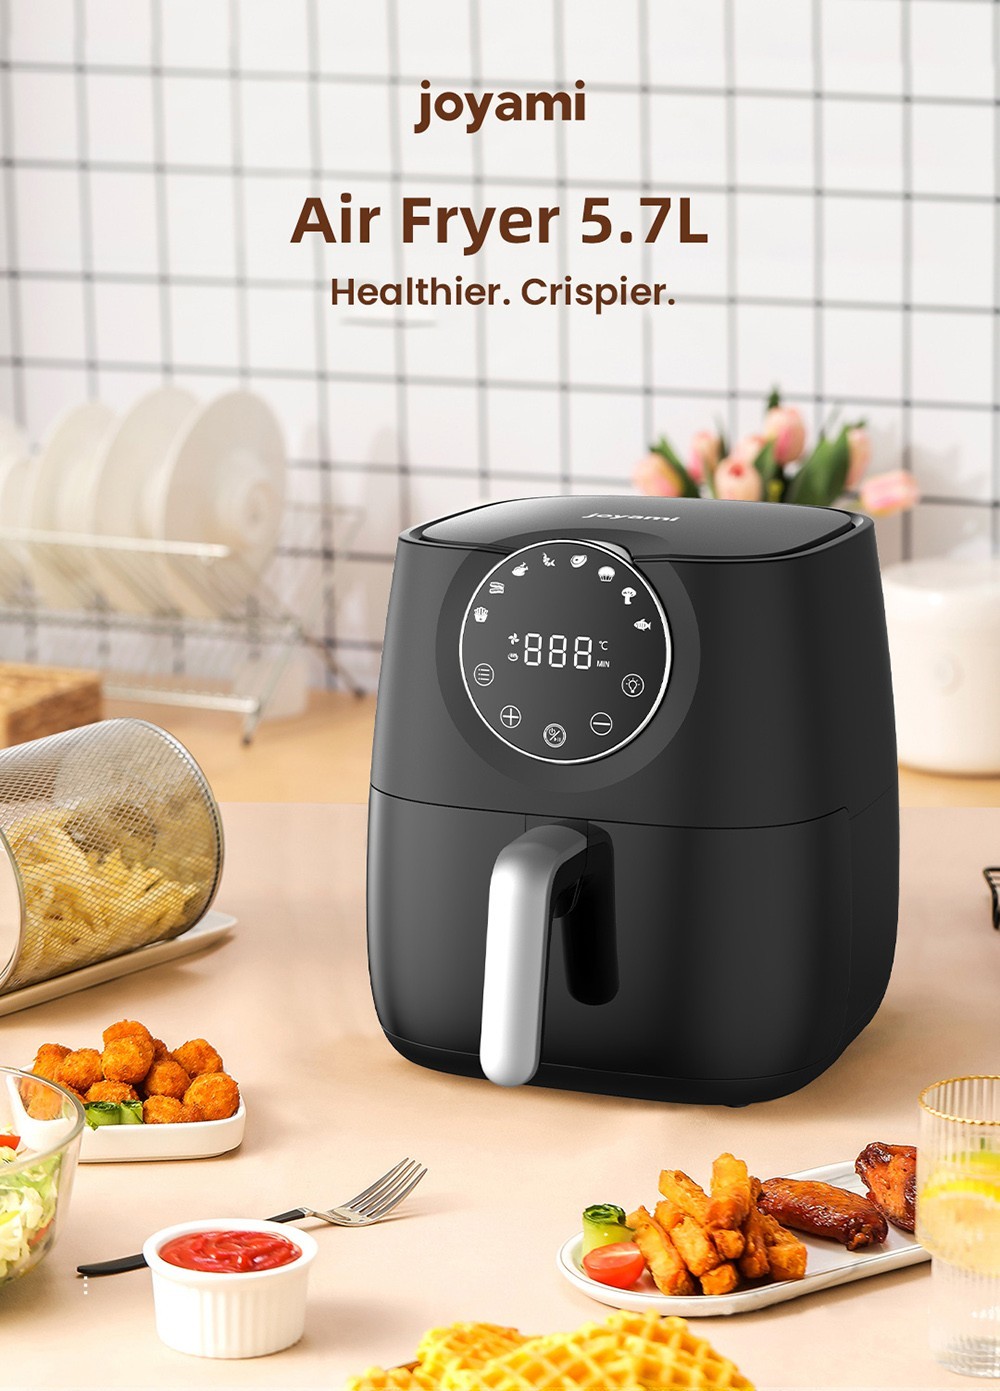 JOYAMI 1700W Air Fryer with Visible Window, 5.7L/6QT Capacity, 8 Presets, Touchscreen, Nonstick and Dishwasher Safe